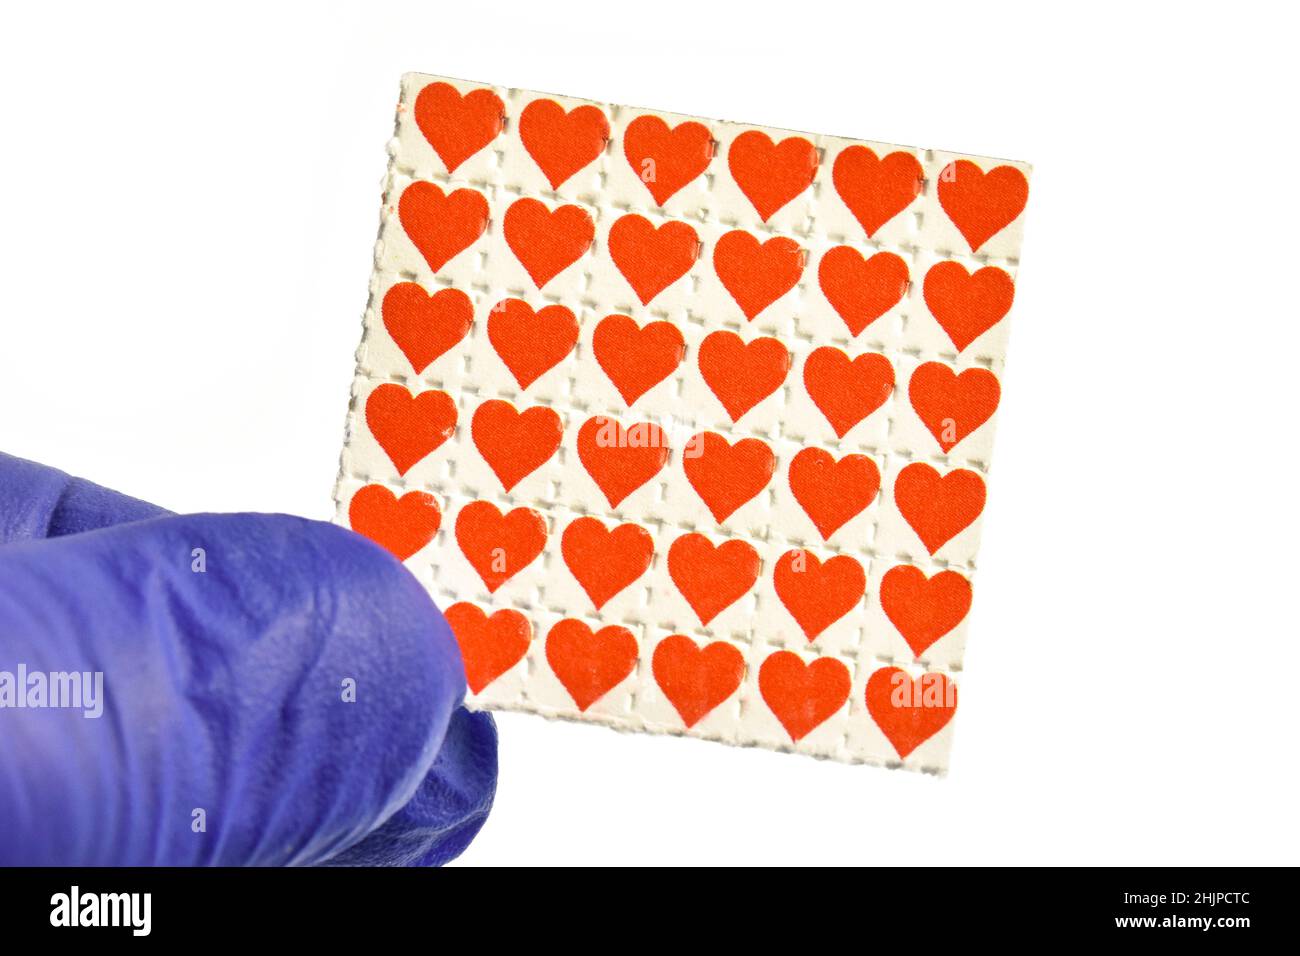 Love hearts acid trips, Blotting paper impregnated with the drug L.S.D. Stock Photo